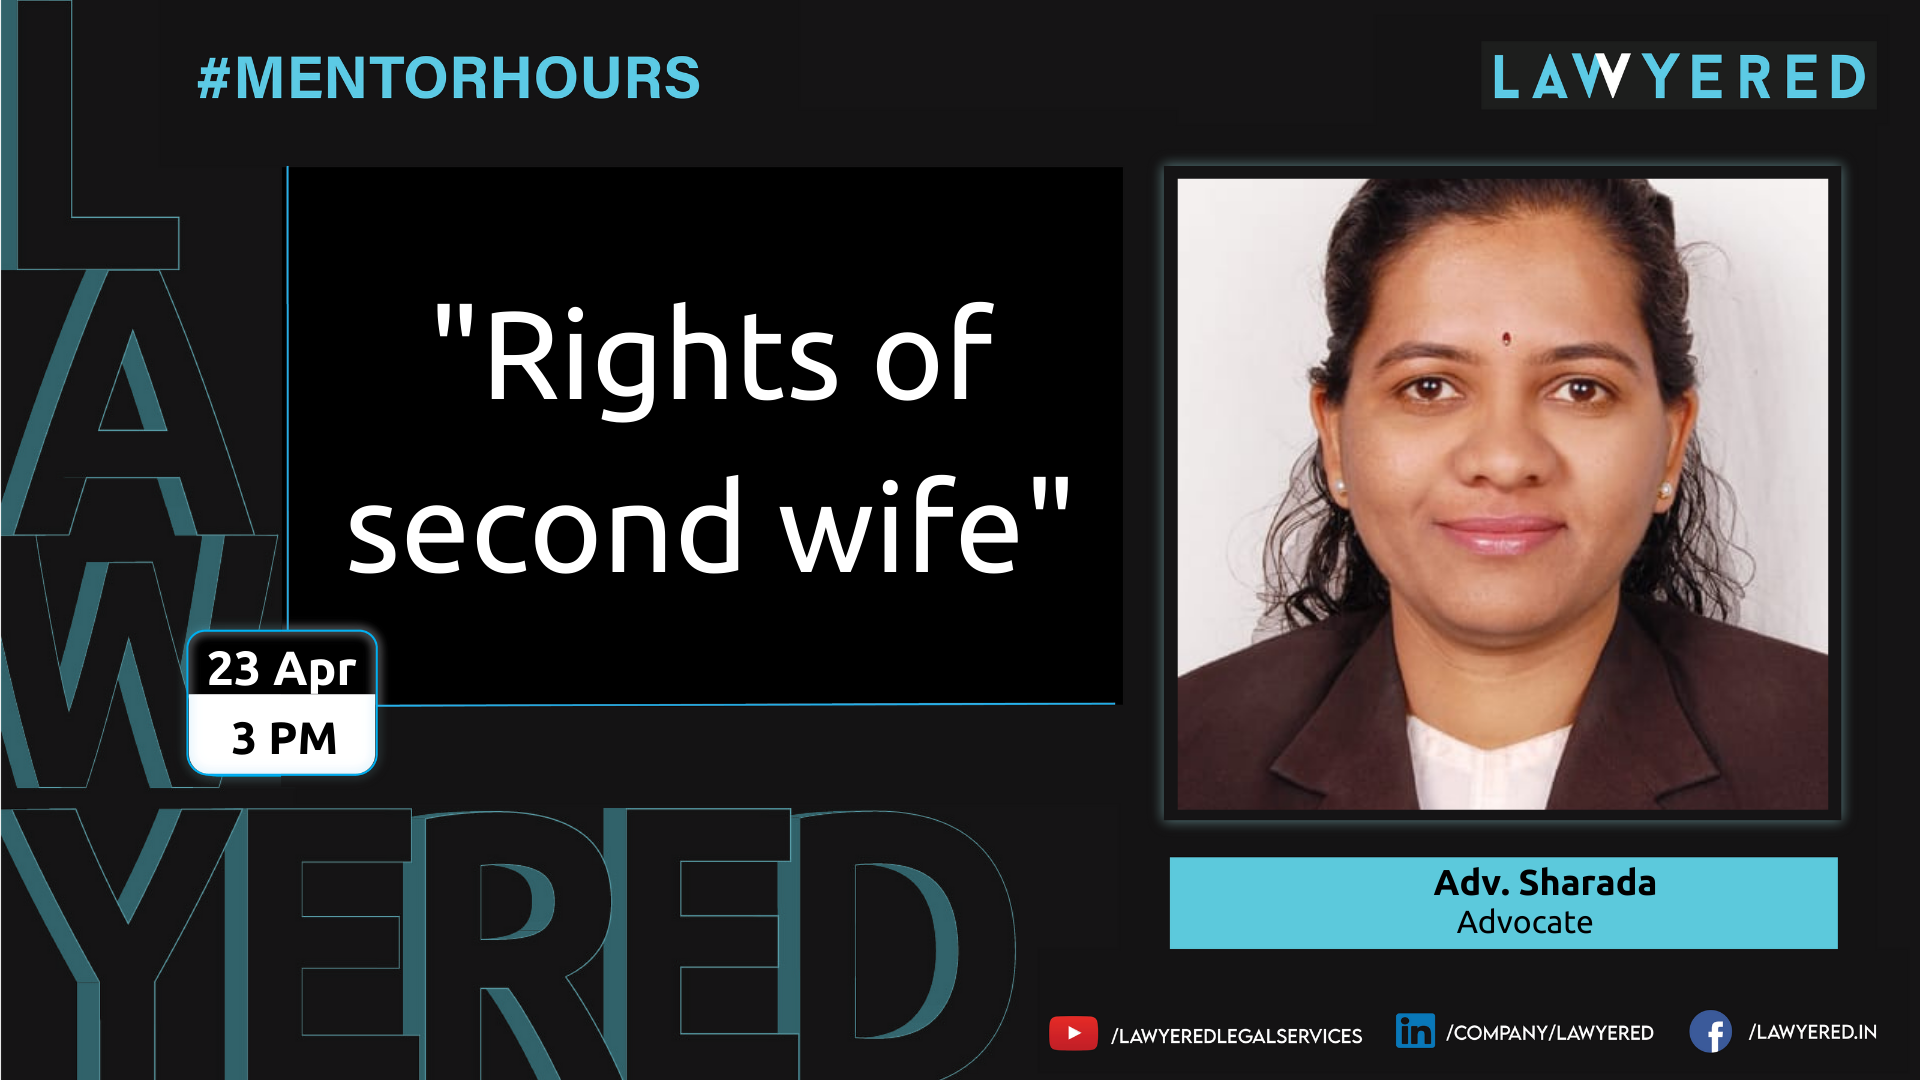 Rights of second wife #MentorHours​ by Adv. Sharada Lawyered